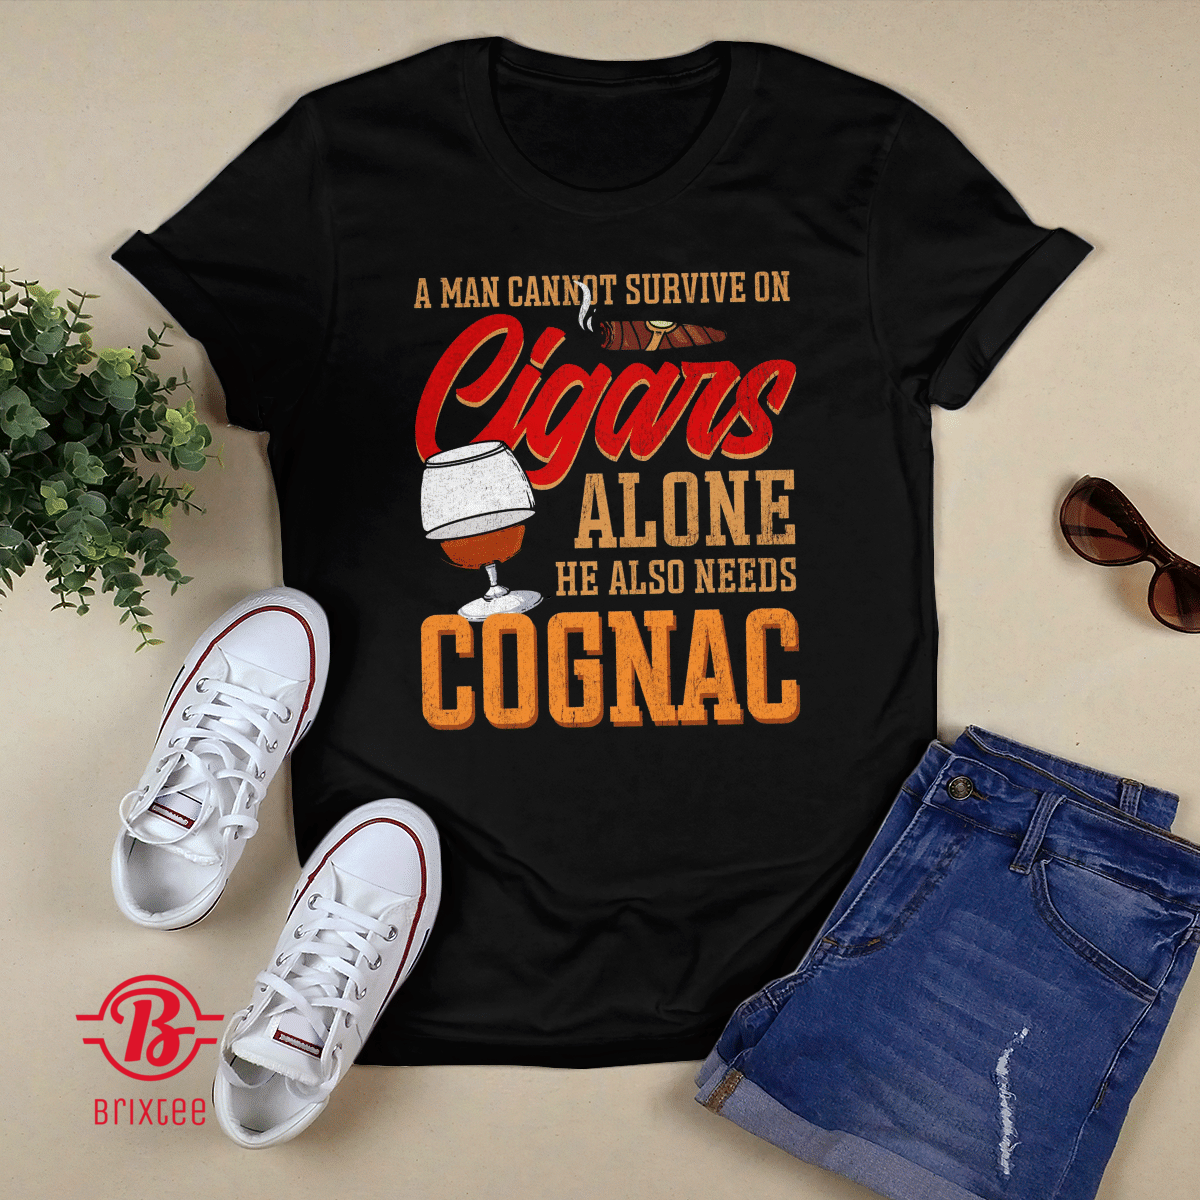 A Man Cannot Survive On Cigars Alone He Also Needs Cognac